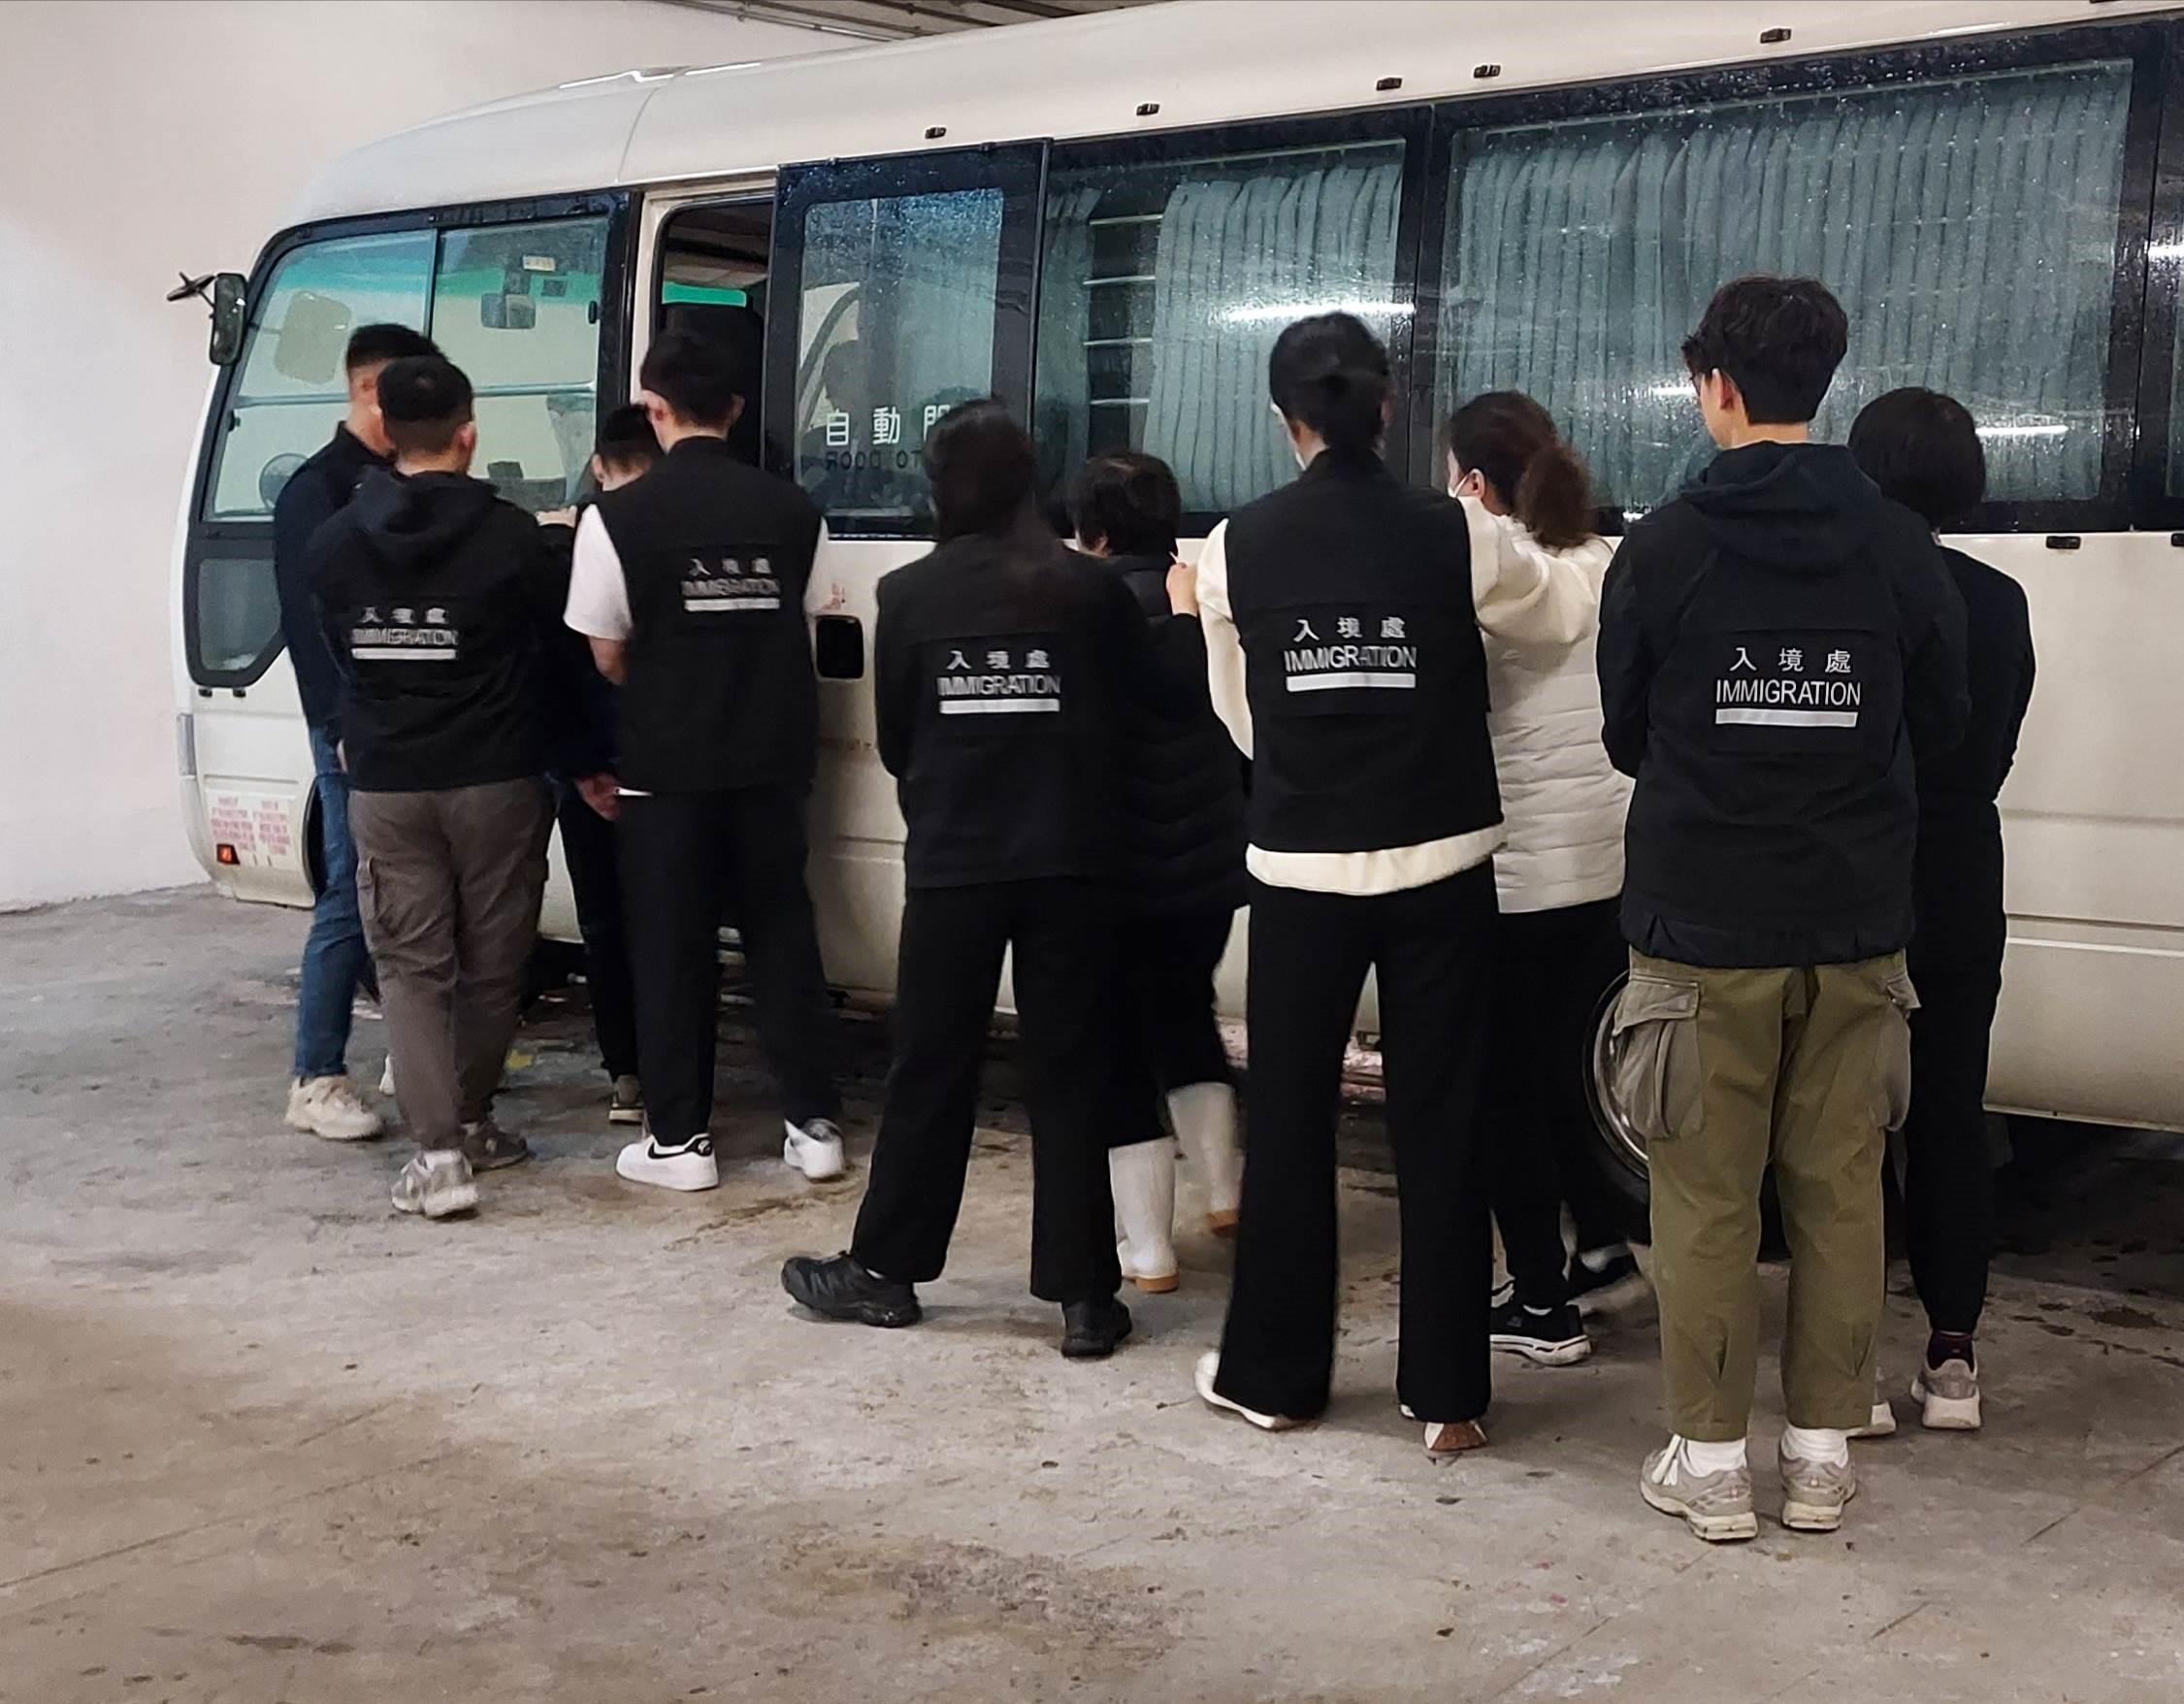 The Immigration Department mounted a series of territory-wide anti-illegal worker operations codenamed "Twilight" and joint operations with the Hong Kong Police Force codenamed "Champion" and "Windsand" for four consecutive days from March 11 to yesterday (March 14). Photo shows suspected illegal workers arrested during an operation.